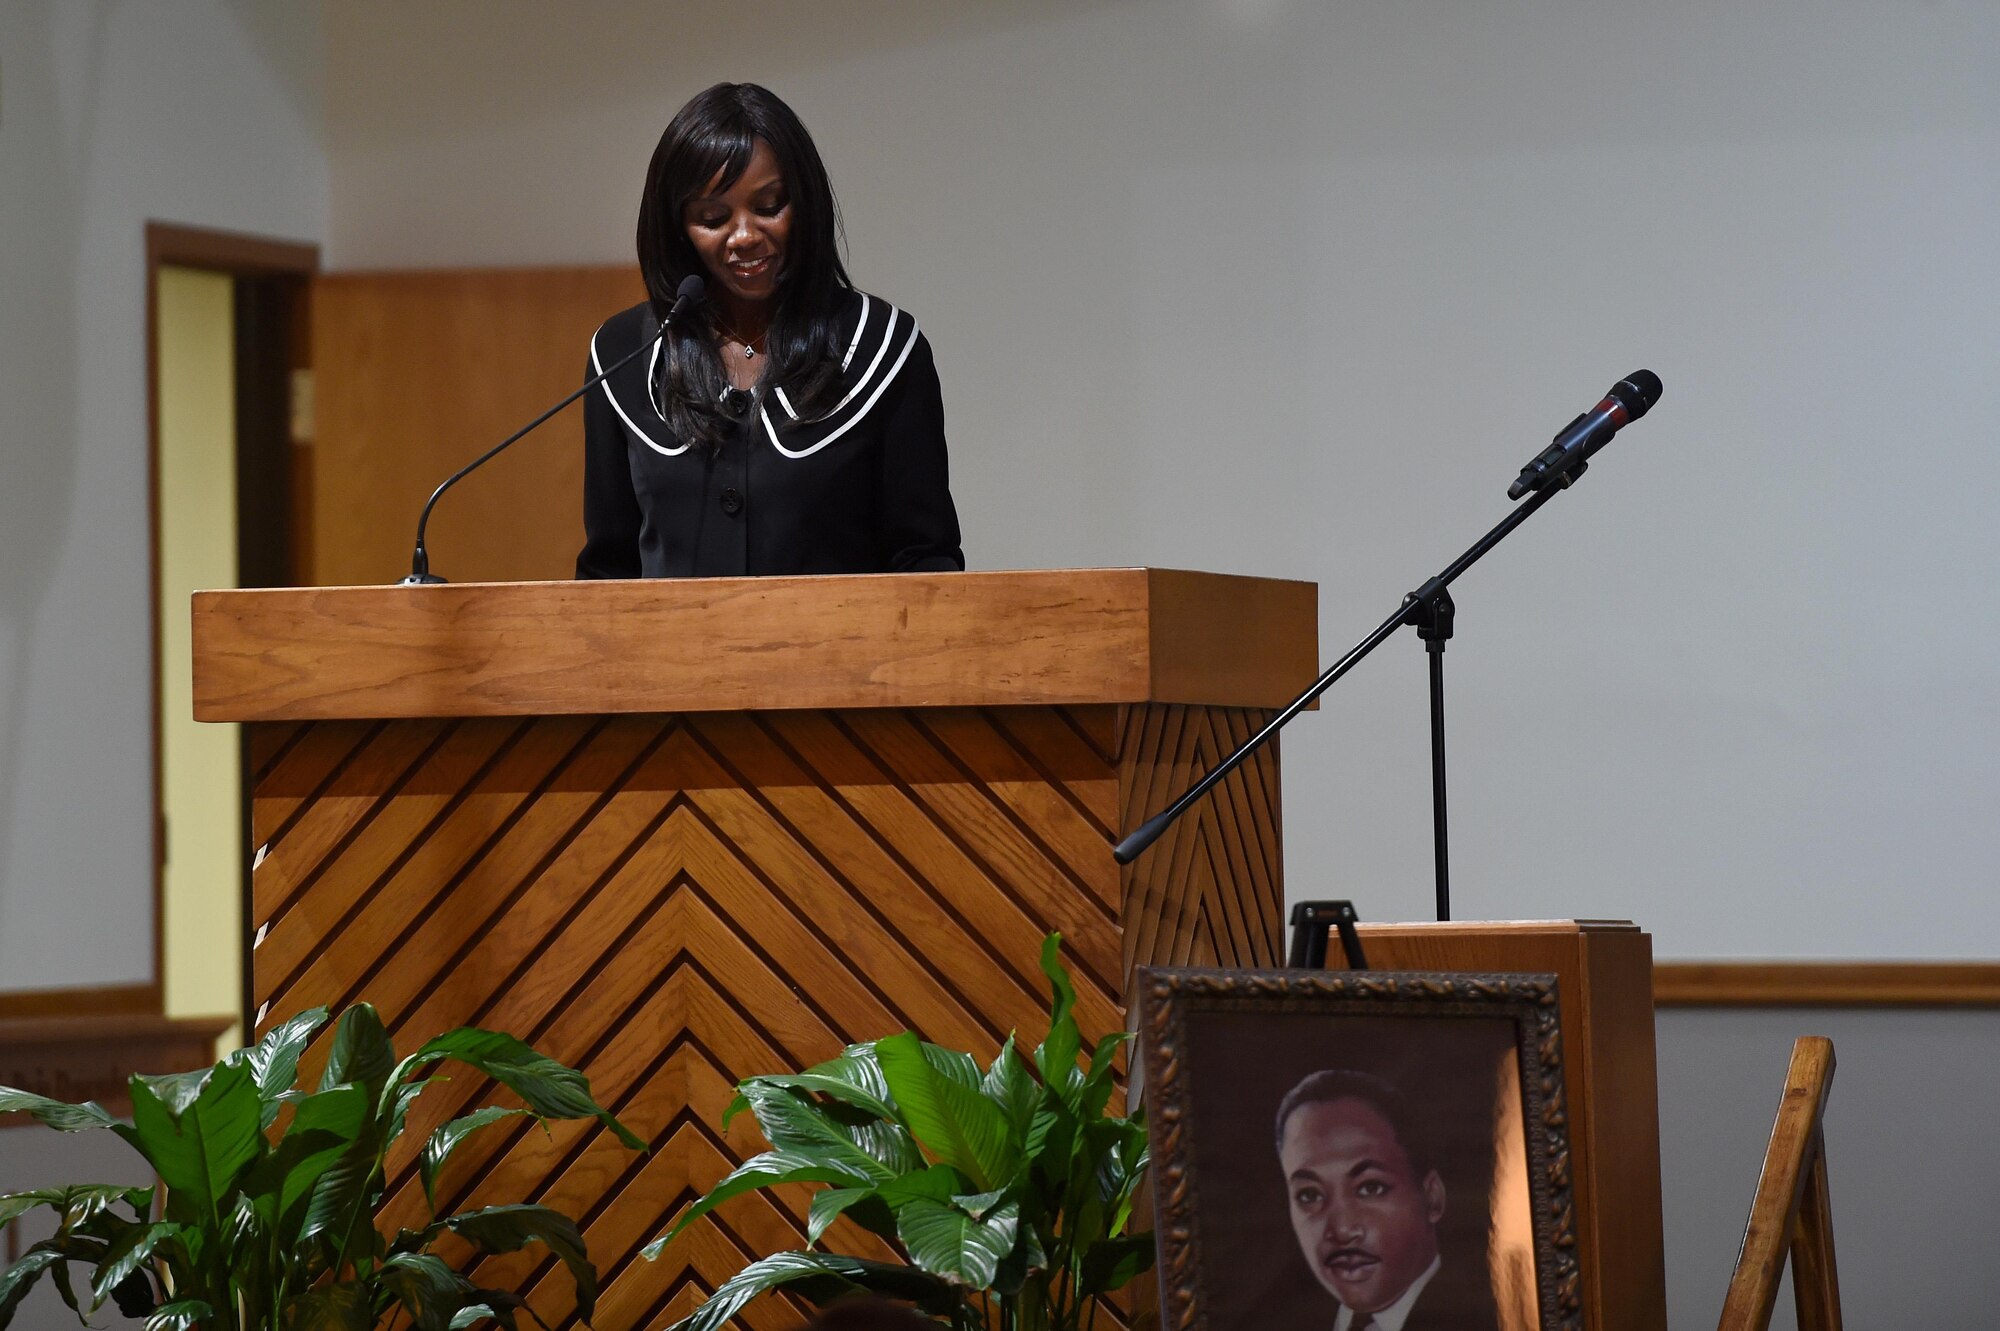 Chaplain (Maj.) Michelle Law-Gordon, staff chaplain with Air Force Reserve Command, speaks during the Martin Luther King Jr. Commemorative Service at the Hurlburt Field Chapel, Jan. 12, 2017. Law-Gordon referred to Martin Luther King Jr. Day as a day on, not a day off. Martin Luther King Jr. Day is celebrated the third Monday of January to commemorate his birthday, and was first observed as a federal holiday in 1986. (U.S. Air Force photo by Senior Airman Jeff Parkinson)